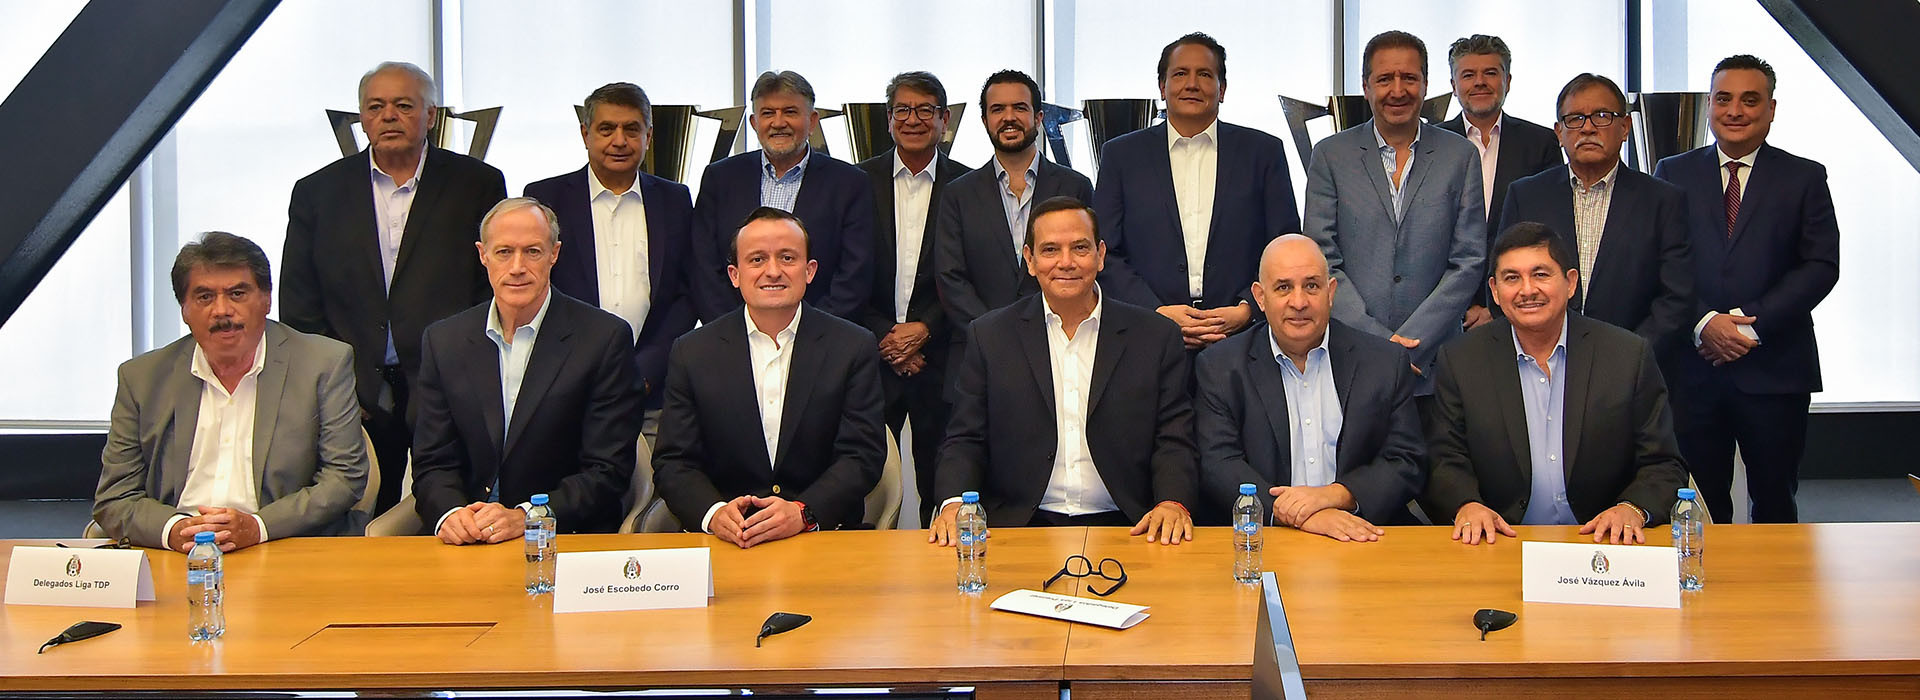 Ivar Sisniega, second from left below, said it was a "difficult choice" to make when FMF came calling ©FMF (Image obtained at insidethegames.biz)